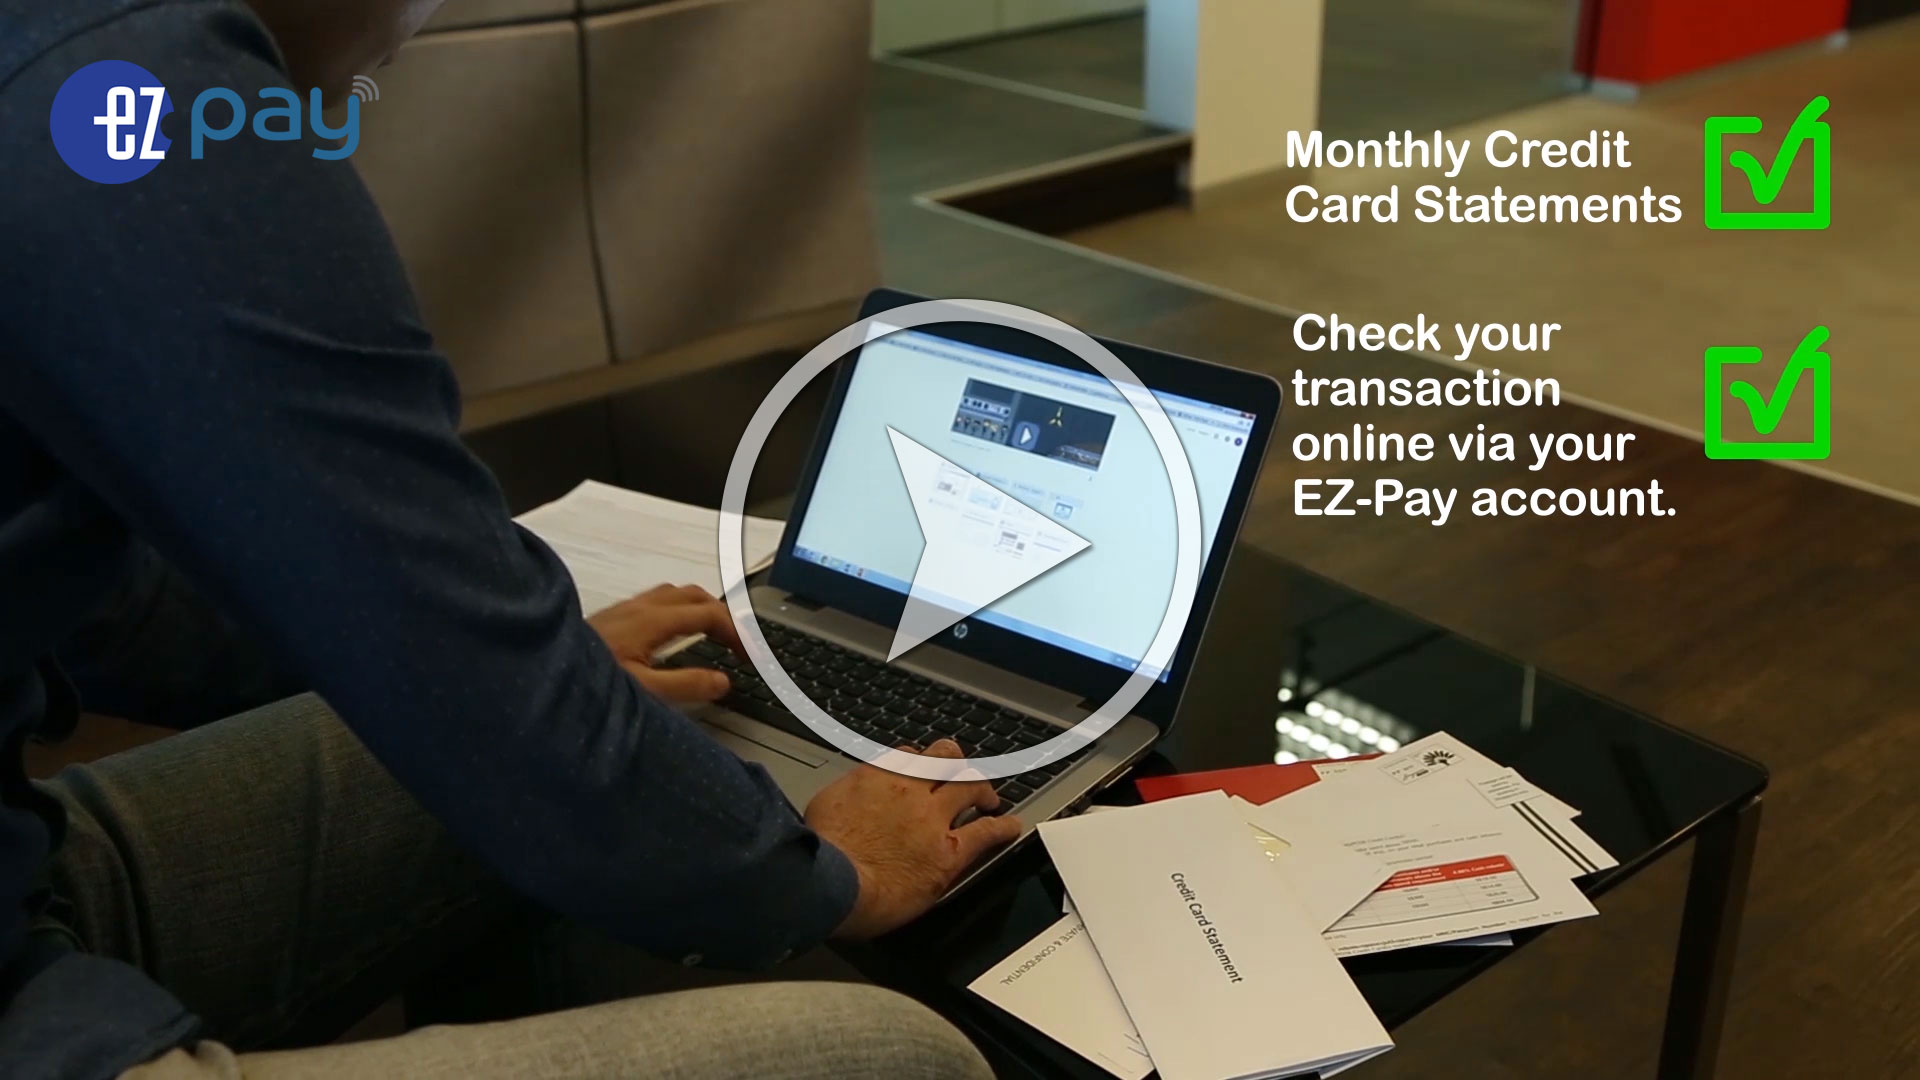 How do you set up automatic payments with Credit Acceptance?